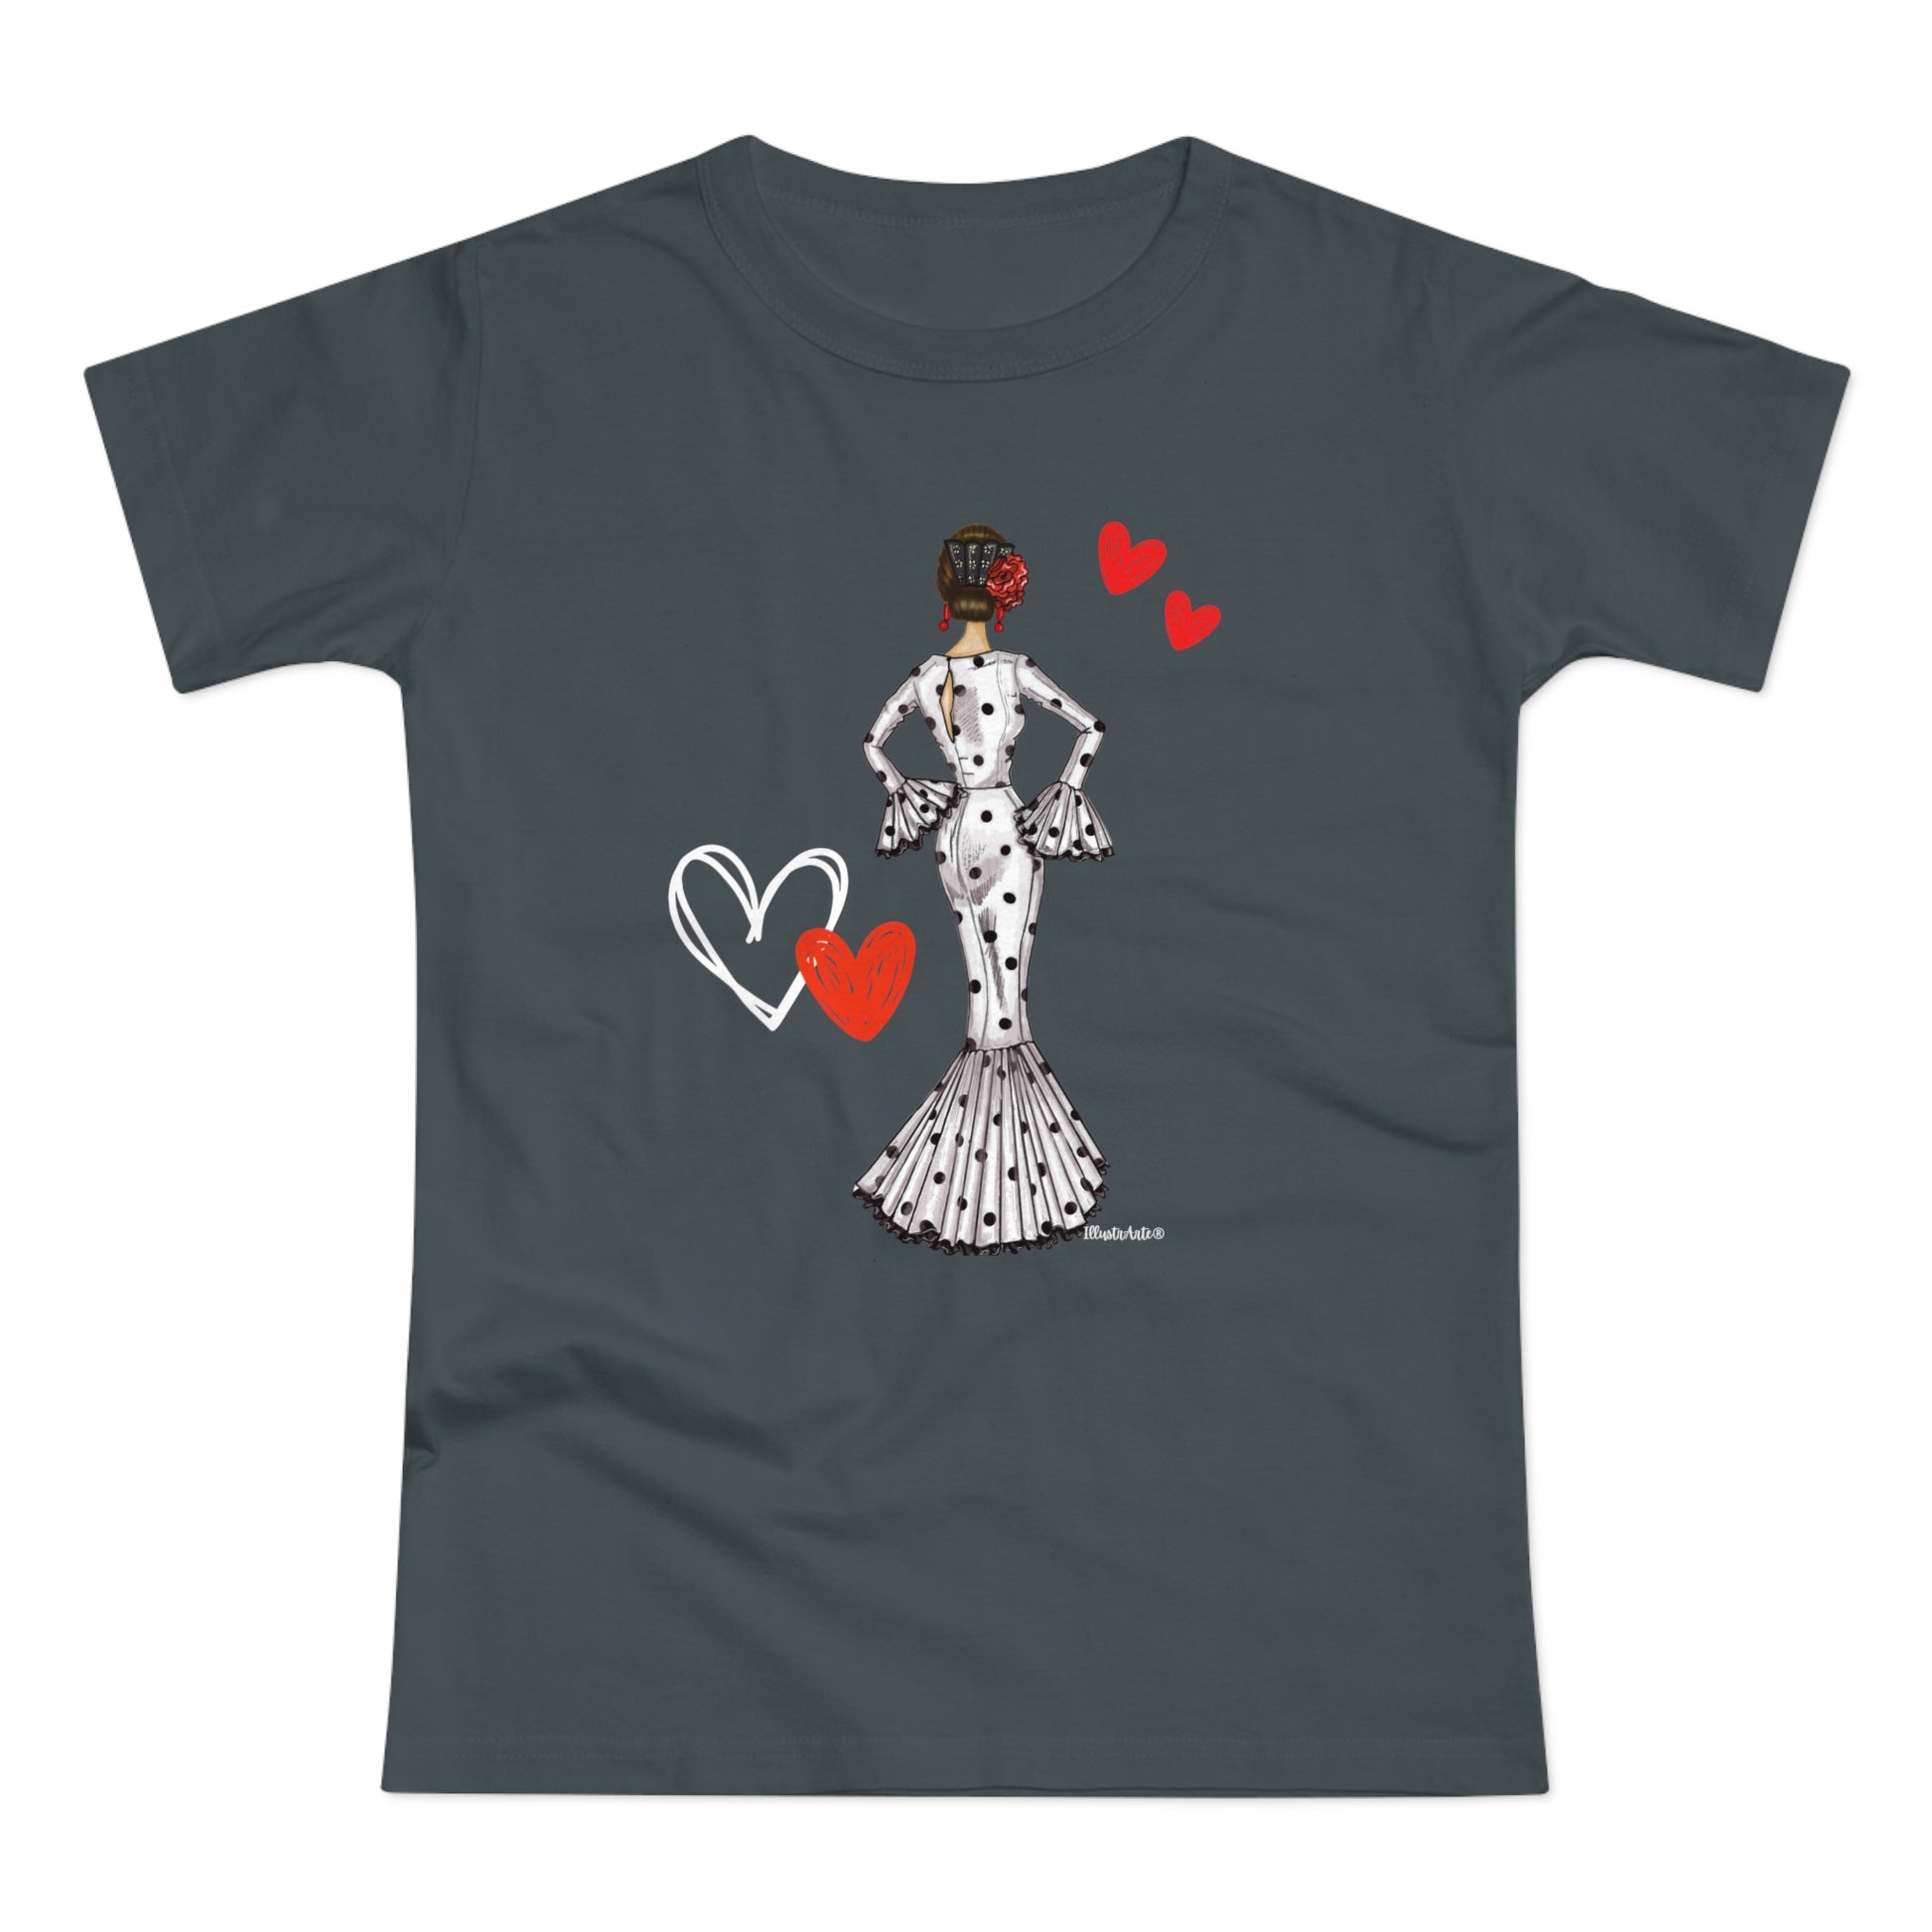 a t - shirt with a woman in a dress holding a heart